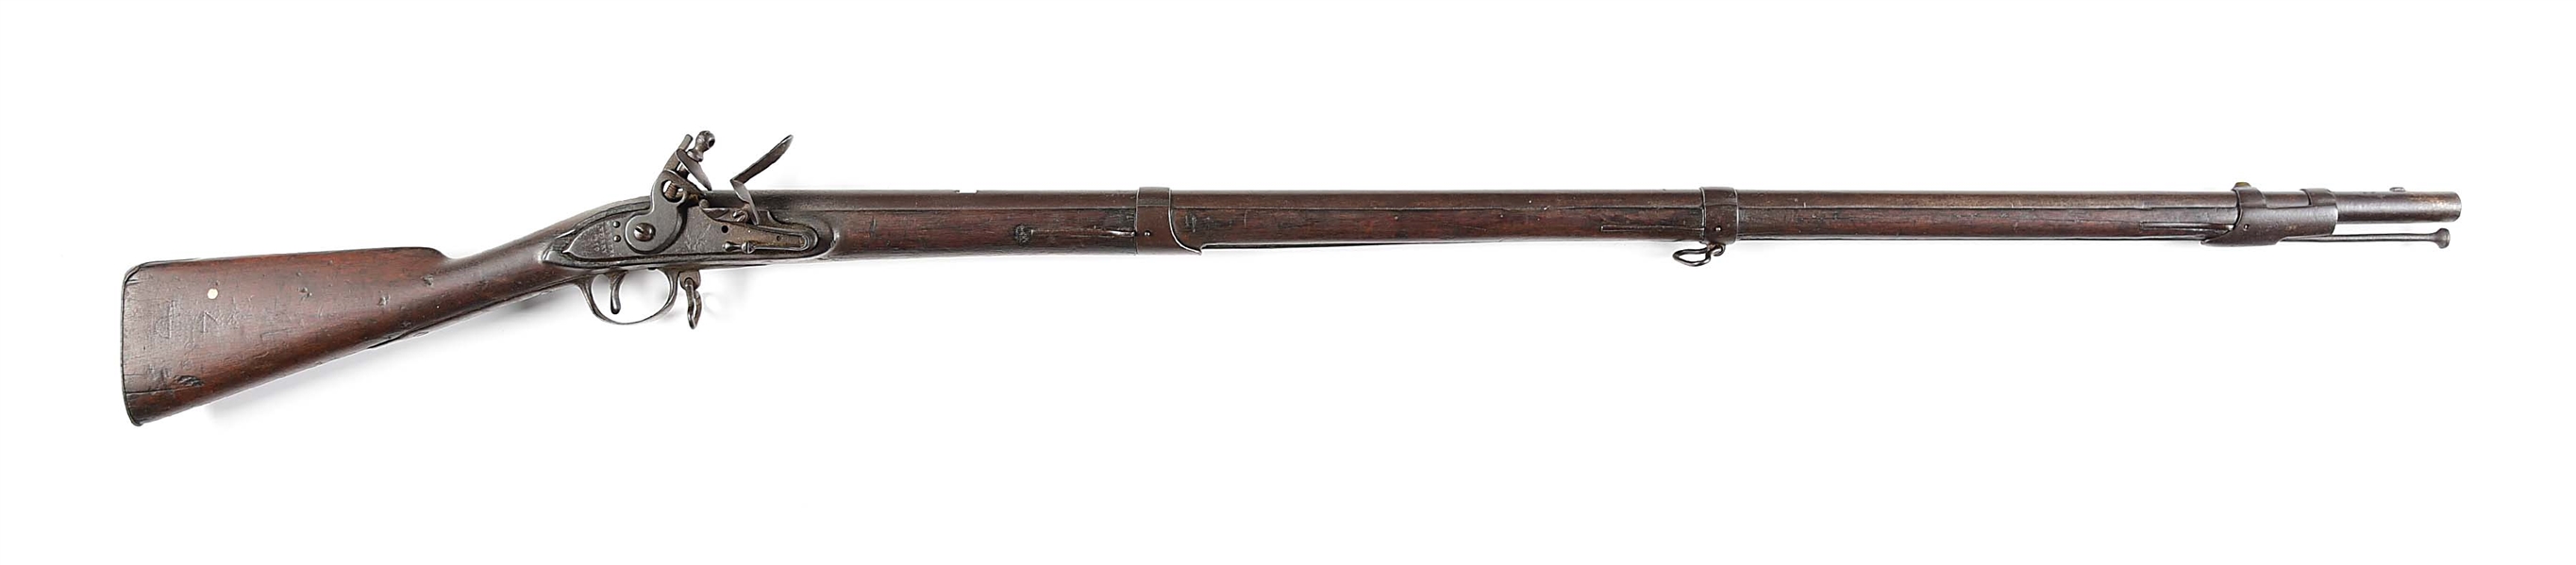 (A) HARPERS FERRY MODEL 1795 .69 CALIBER CONTRACT RIFLE DATED 1810.